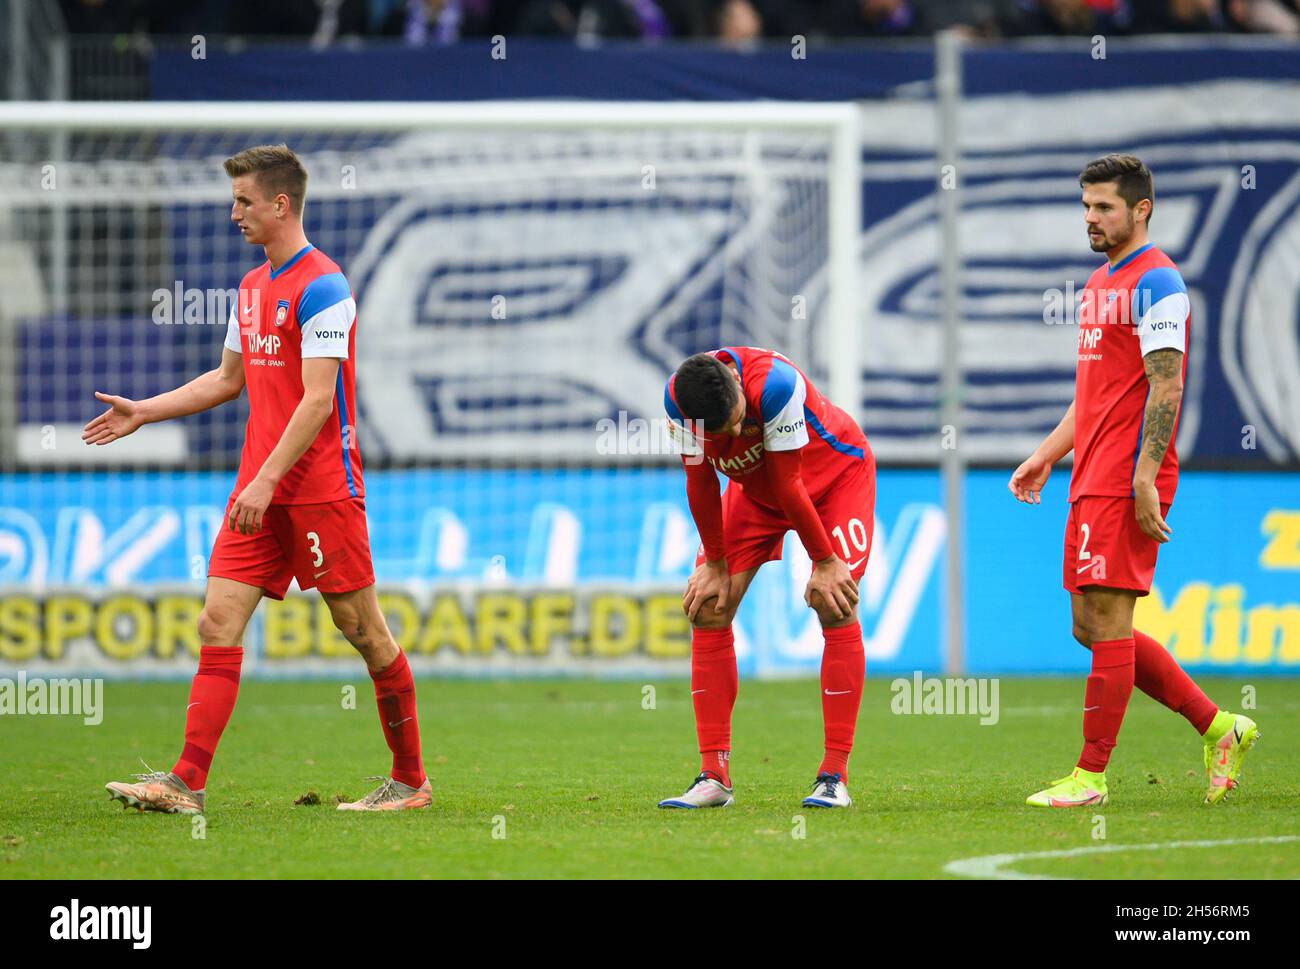 07 November 2021, Saxony, Aue: Football: 2. Bundesliga, Erzgebirge Aue - 1. FC Heidenheim, Matchday 13, Erzgebirgsstadion. Heidenheim's Jan Schöppner (l-r), Tim Kleindienst and Marnon Busch disappointed after the defeat. Photo: Robert Michael/dpa-Zentralbild/dpa - IMPORTANT NOTE: In accordance with the regulations of the DFL Deutsche Fußball Liga and/or the DFB Deutscher Fußball-Bund, it is prohibited to use or have used photographs taken in the stadium and/or of the match in the form of sequence pictures and/or video-like photo series. Stock Photo